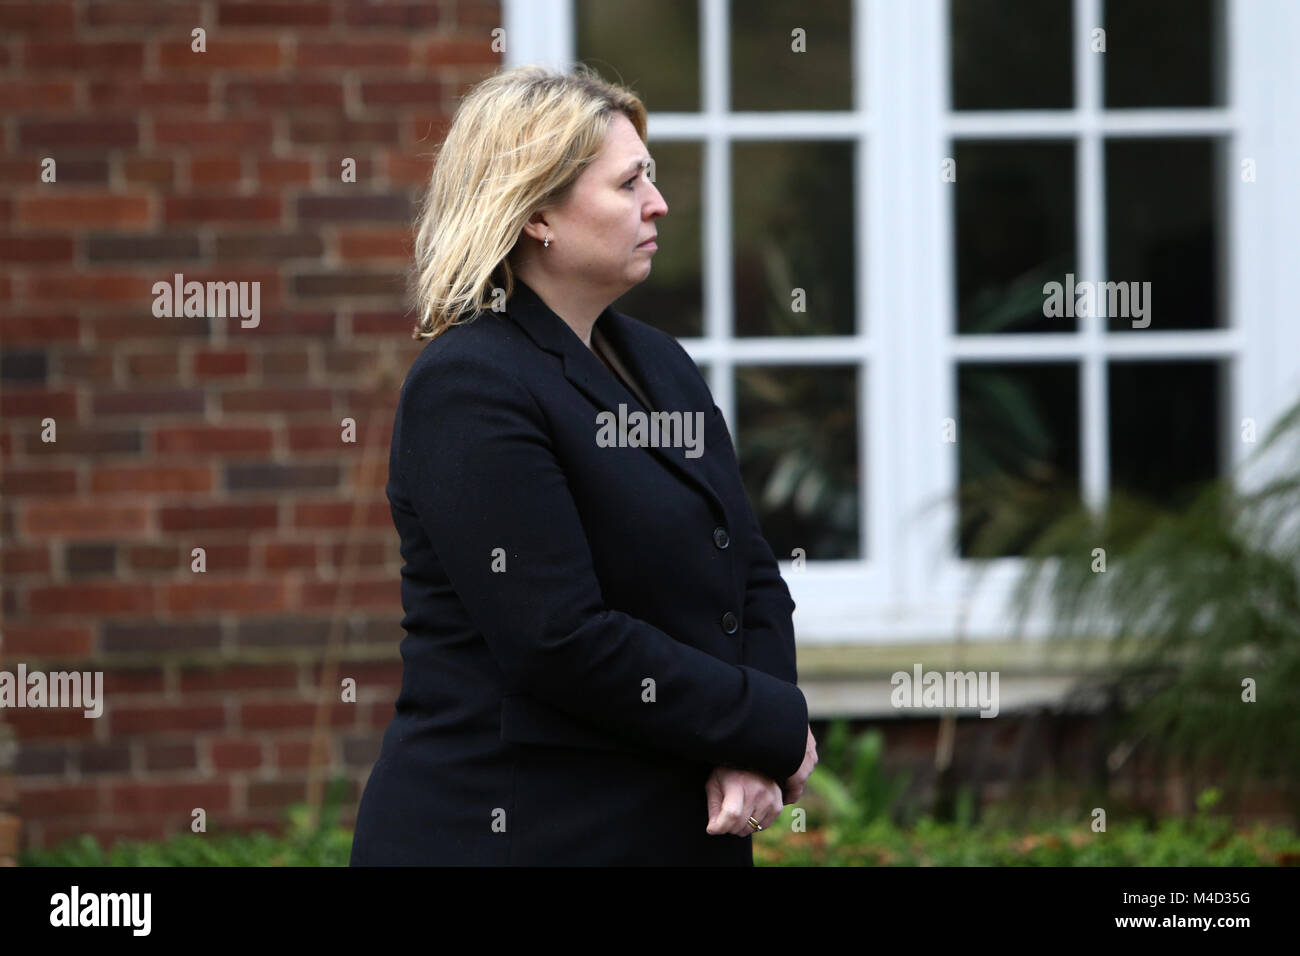 Northern Ireland Secretary of State Karen Bradley greets the British Prime Minister Theresa May at Stormont House,  Belfast, Monday, Feb 12th, 2018. Britain's Prime Minister Theresa May and Irish Prime Minister Leo Varadkar are to visit Belfast later for talks with the Stormont parties. It comes amid speculation the DUP and Sinn Féin are close to agreeing a deal to restore devolved government.Photo/Paul McErlane Stock Photo